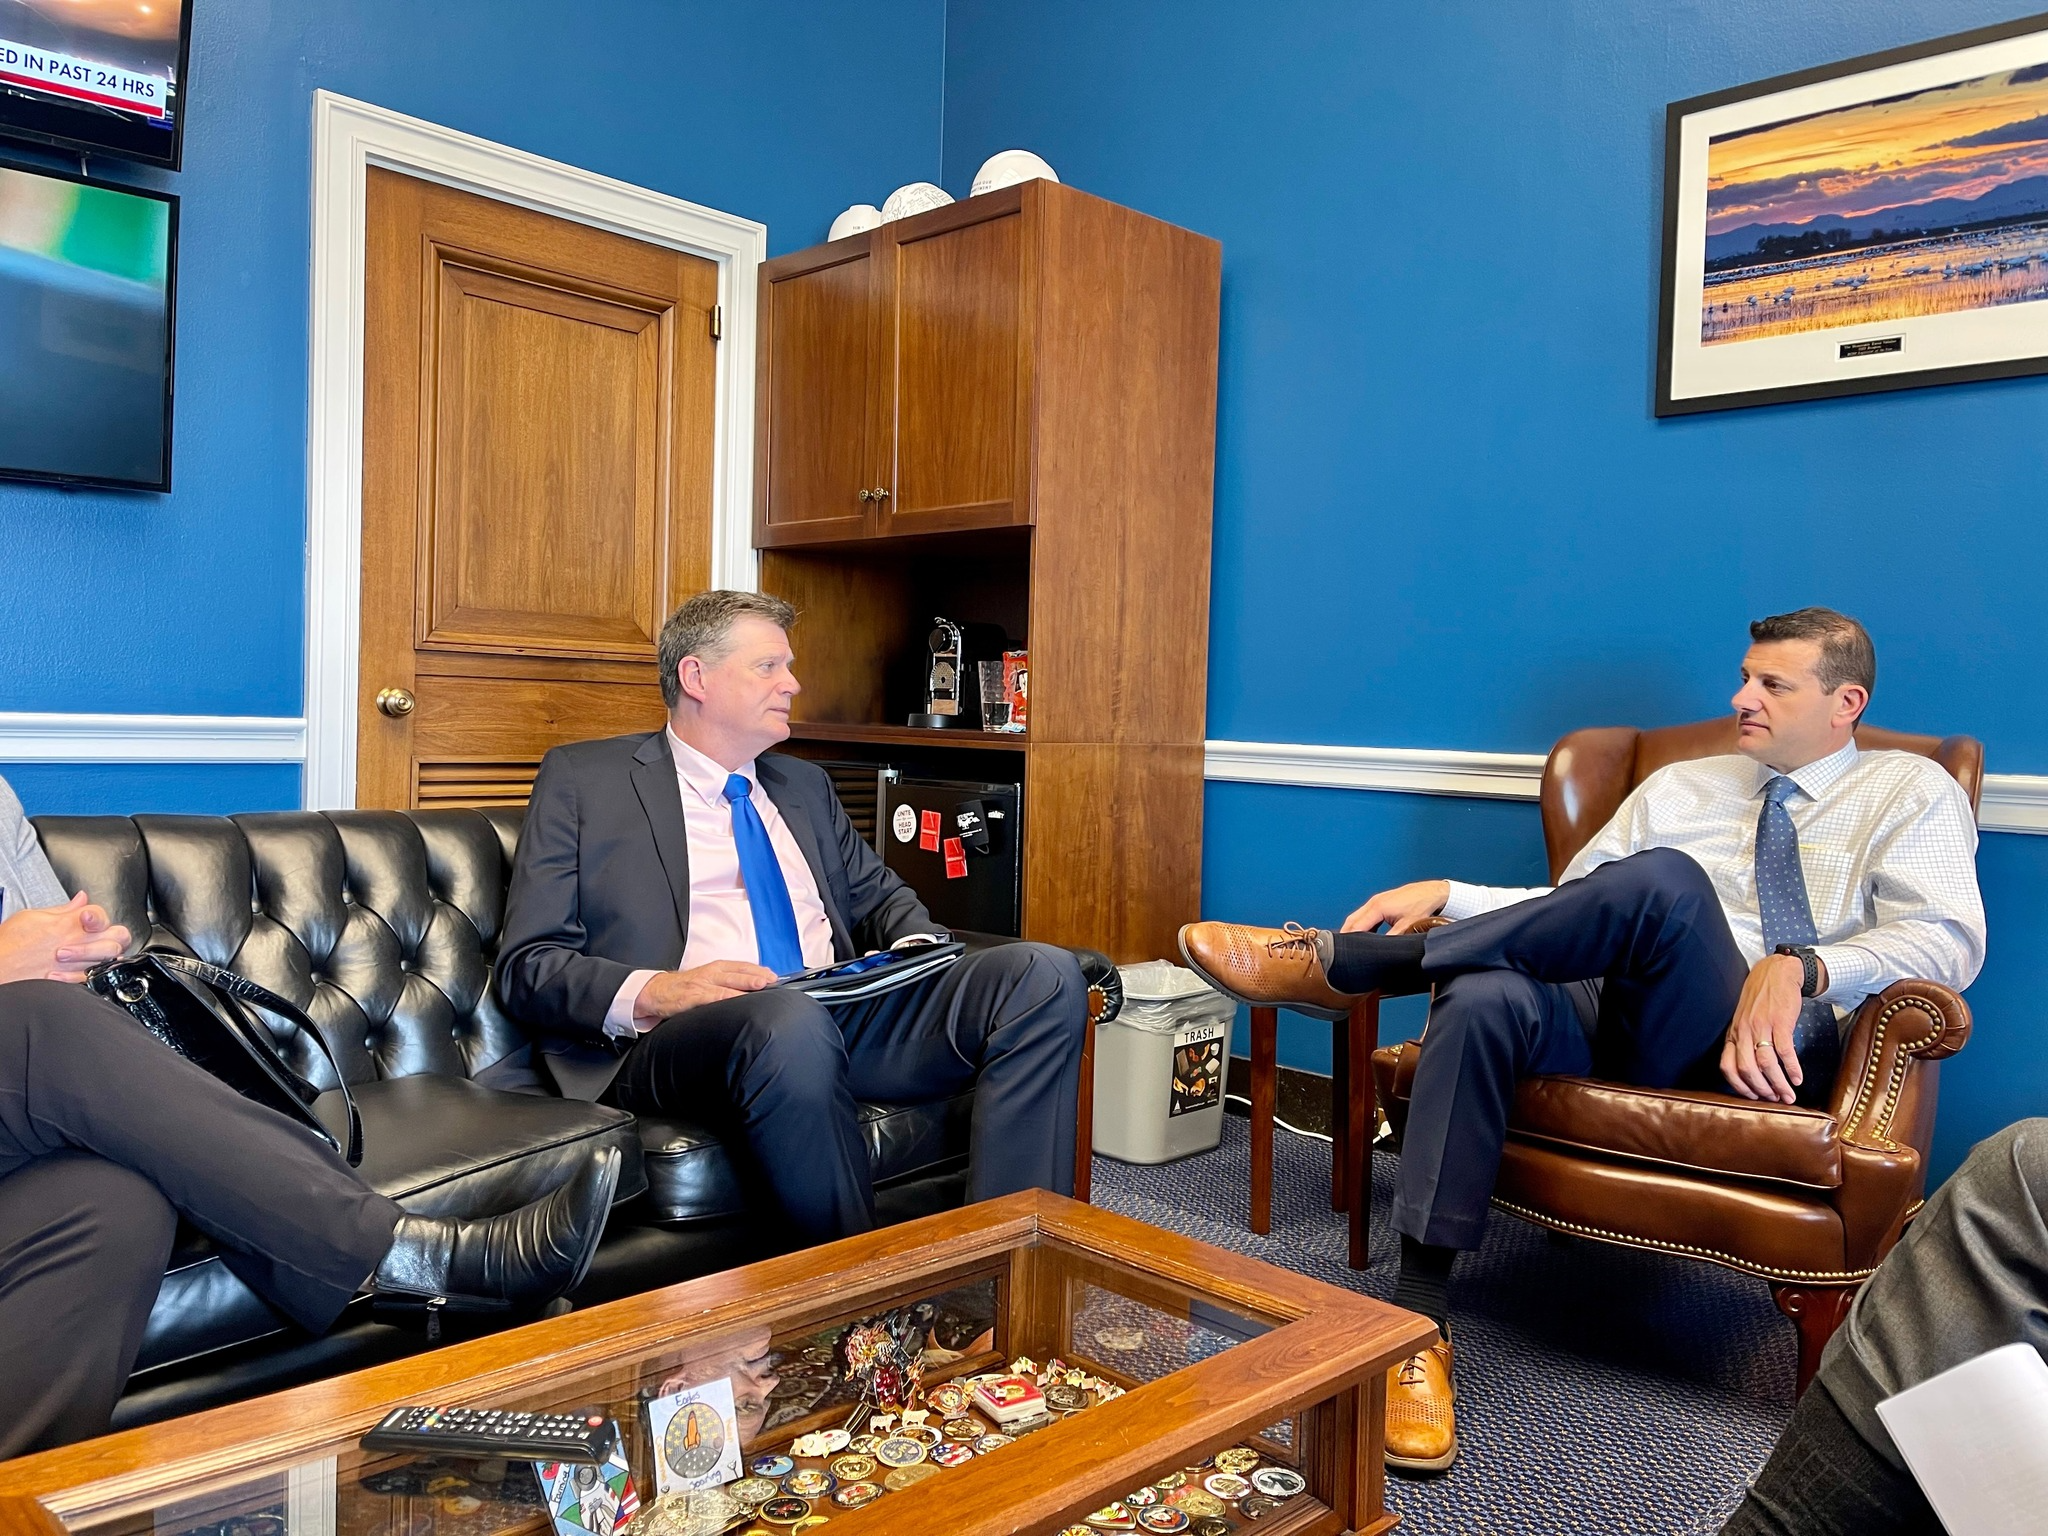 Rep. Valadao meets with the President and CEO of Self-Help Enterprises